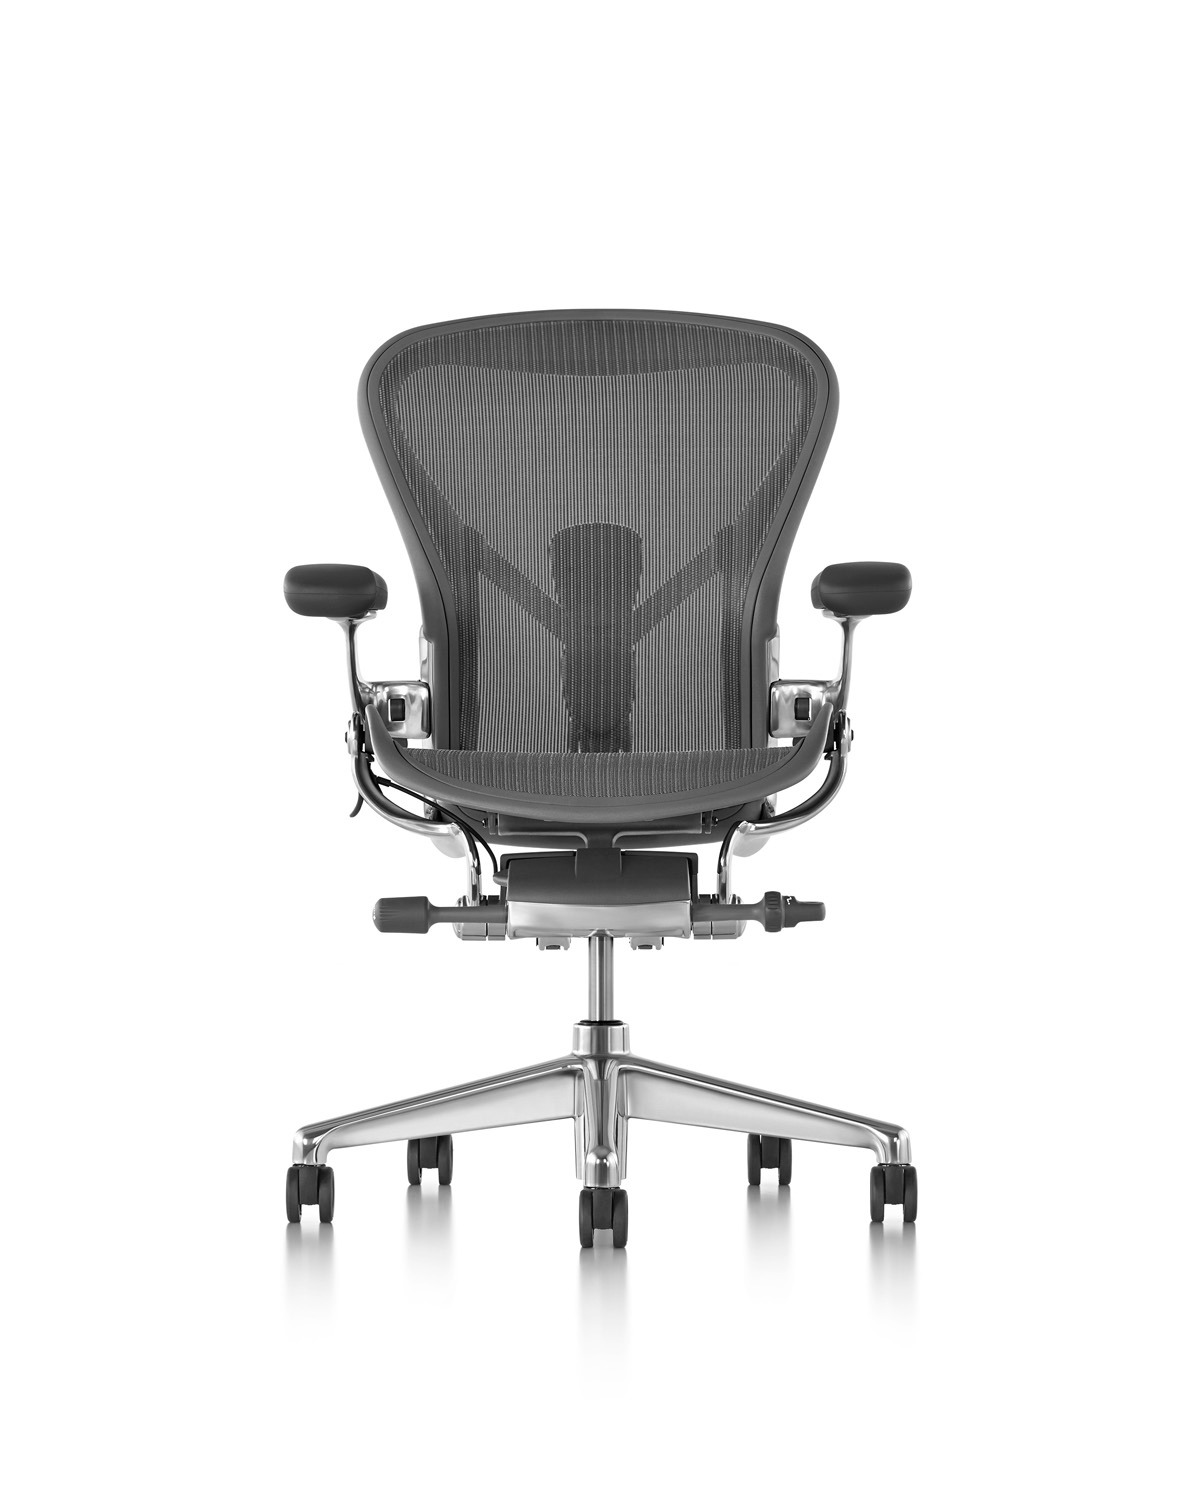 The best things about office furniture companies